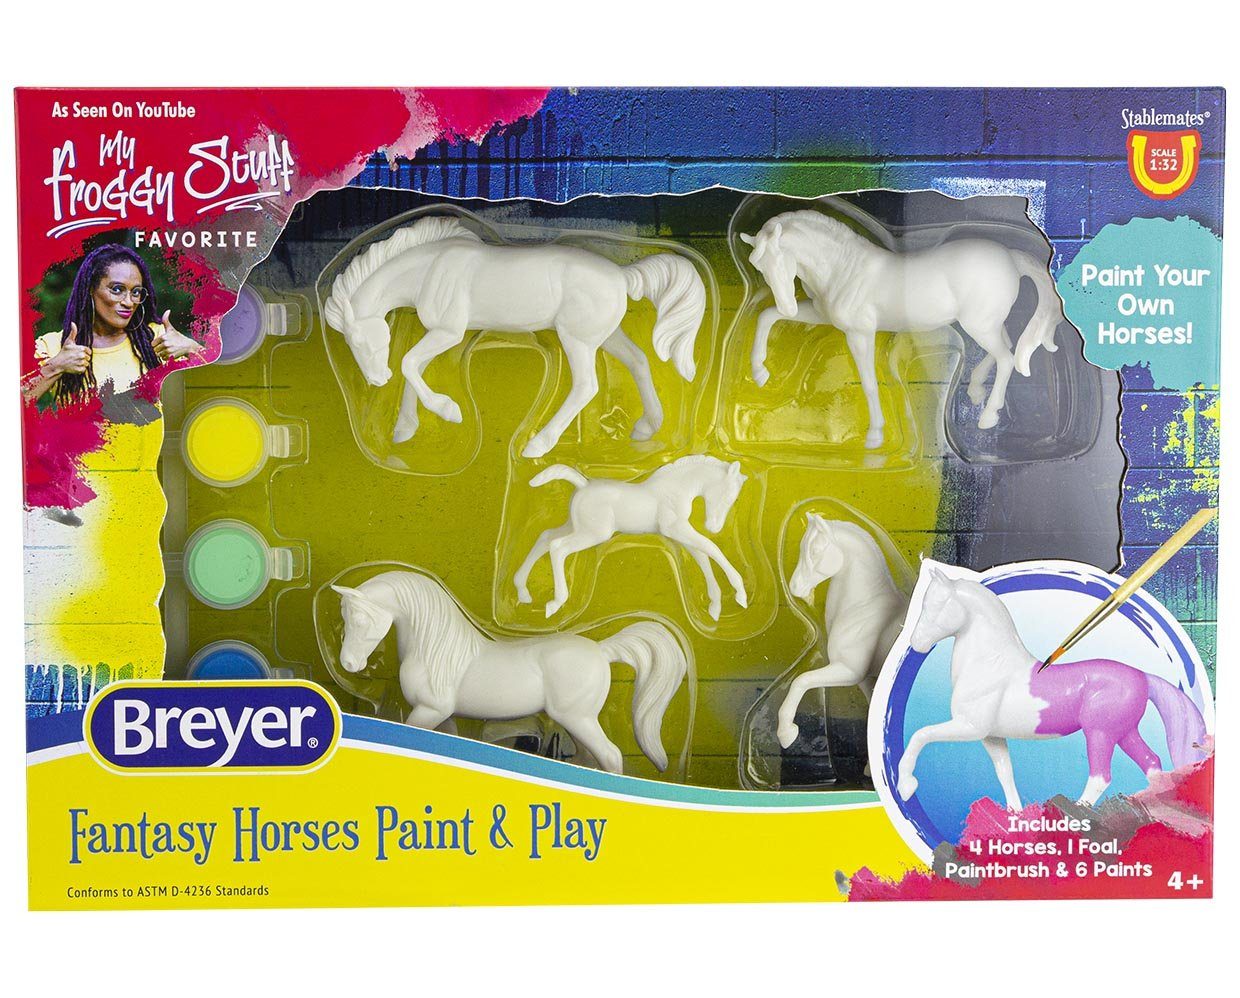 Stablemates Fantasy Horses Paint & Play